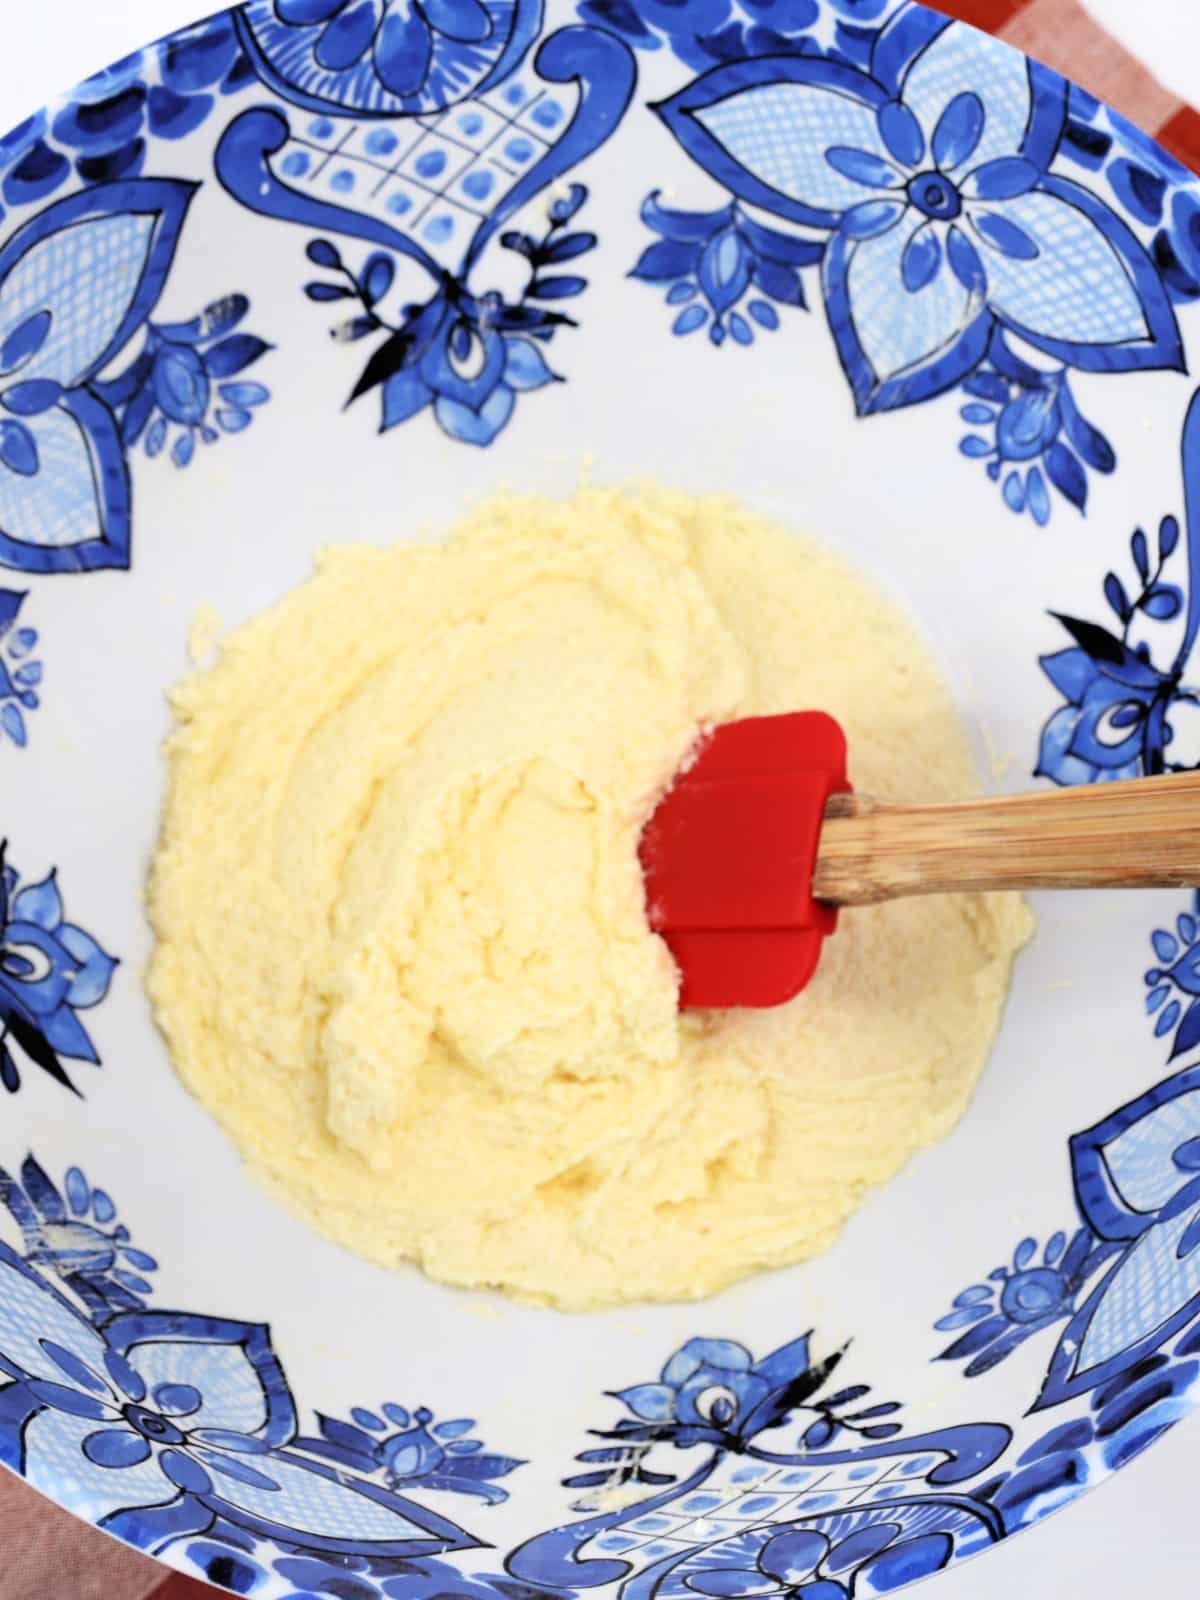 A blue and white bowl with a red spatula in it.